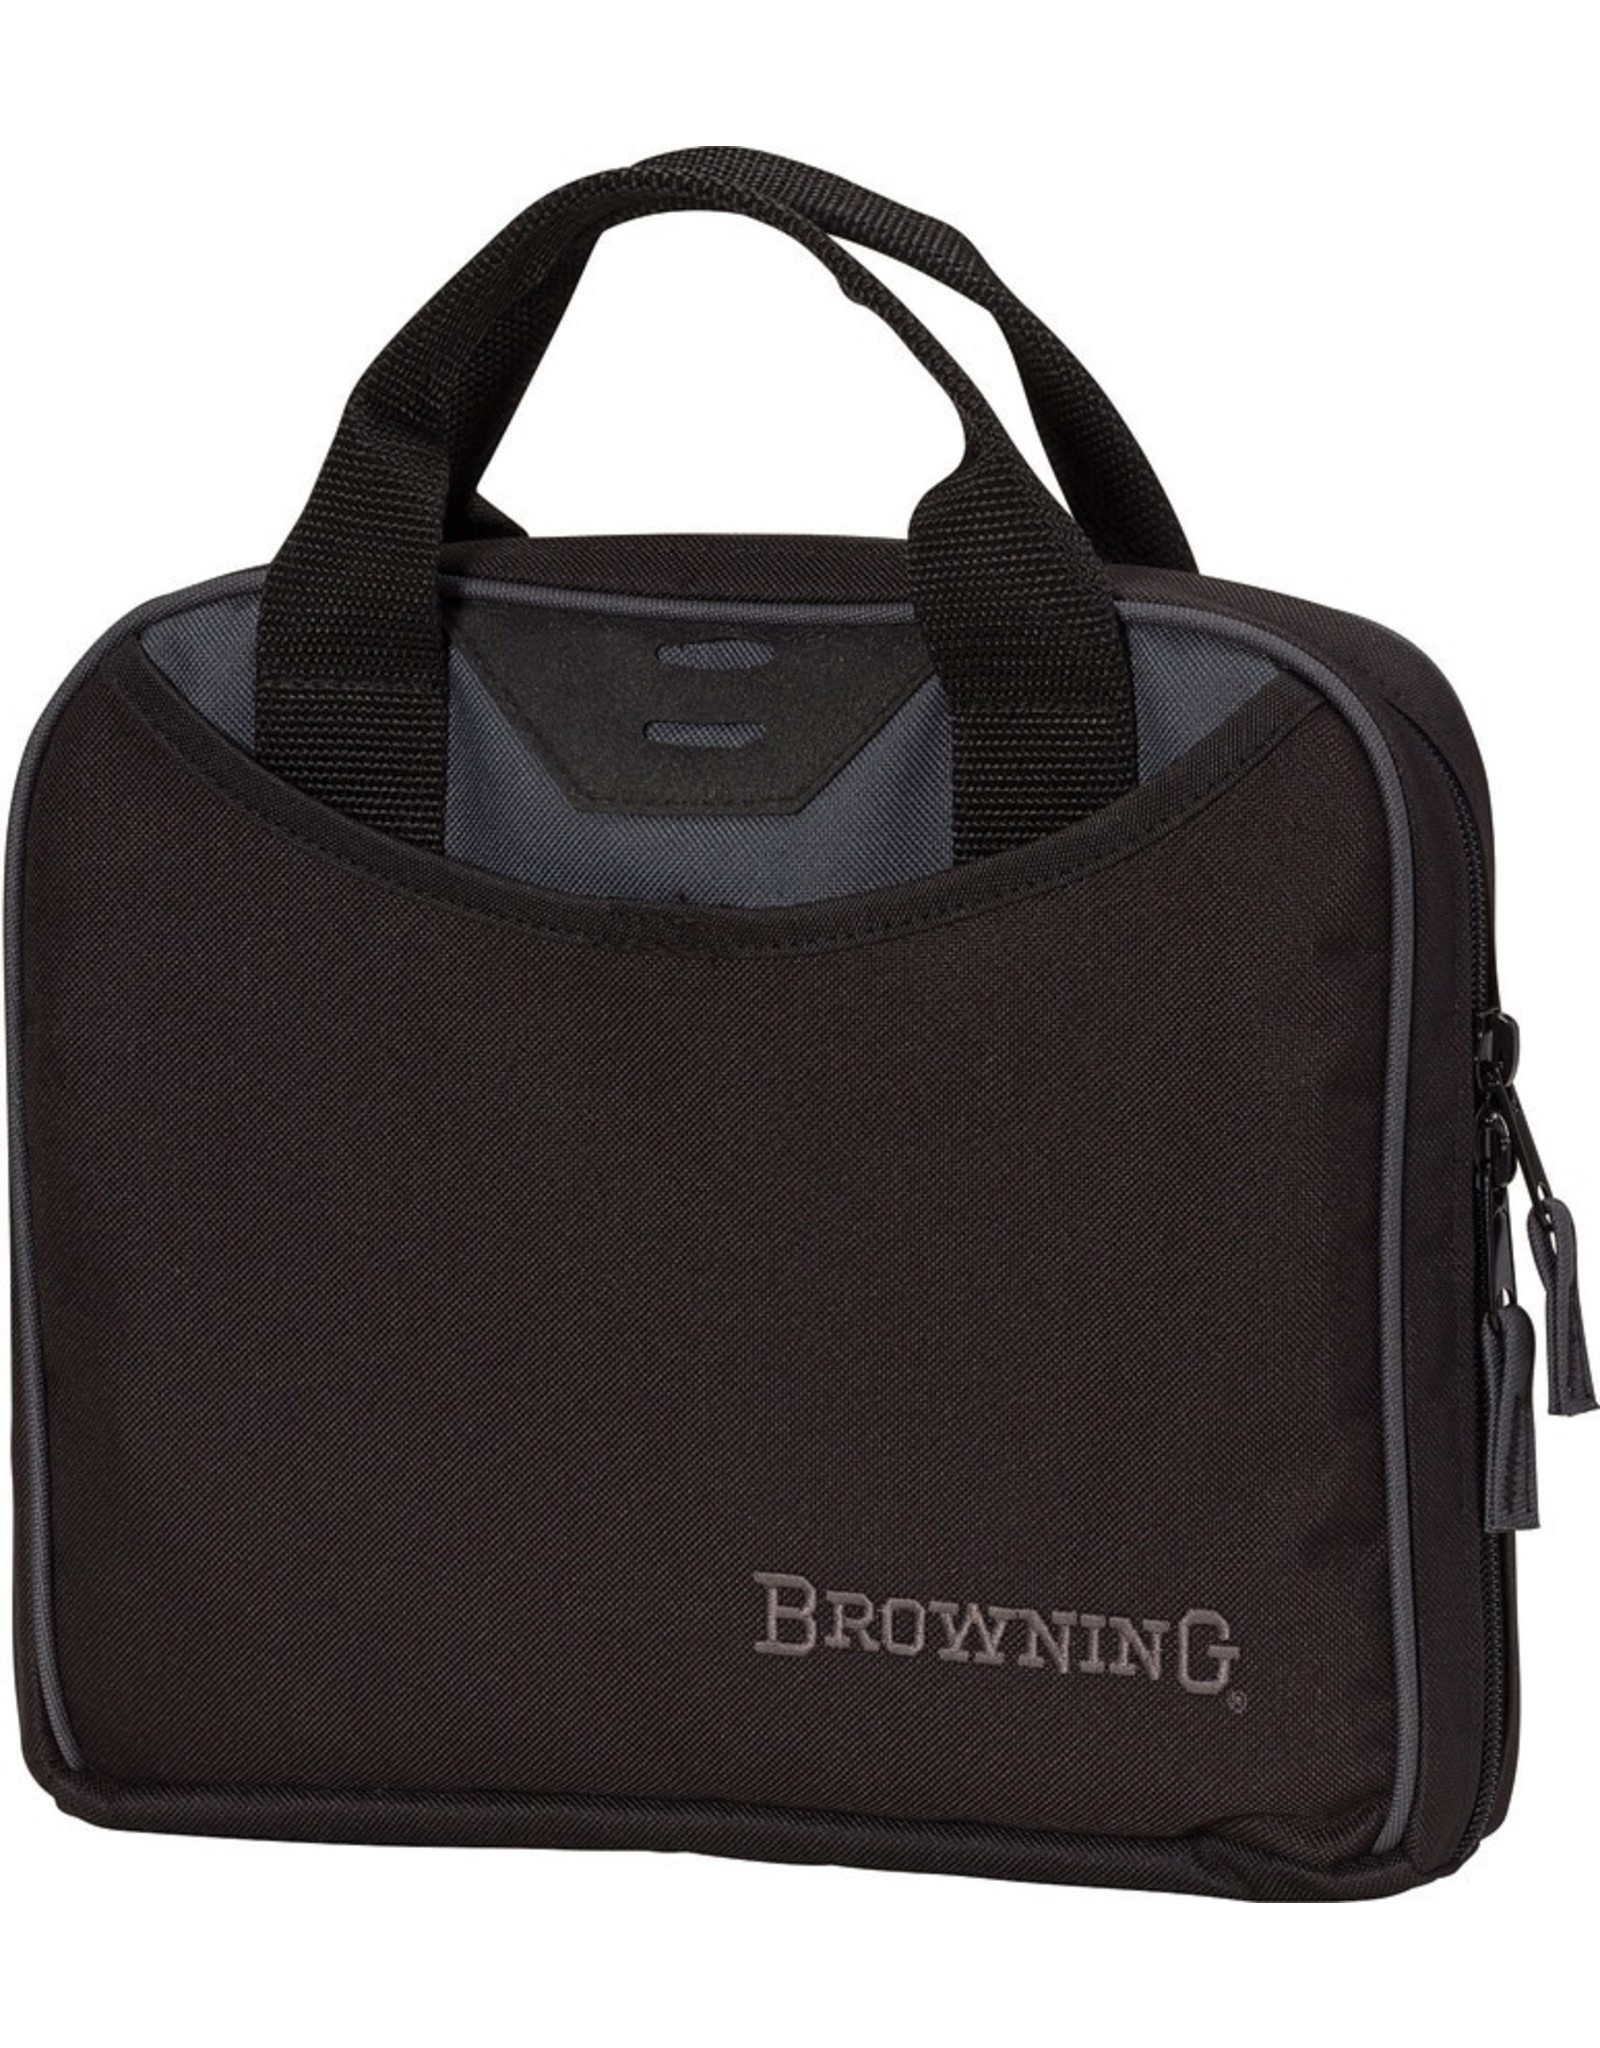 Browning Browning Crossfire Single Pistol Case